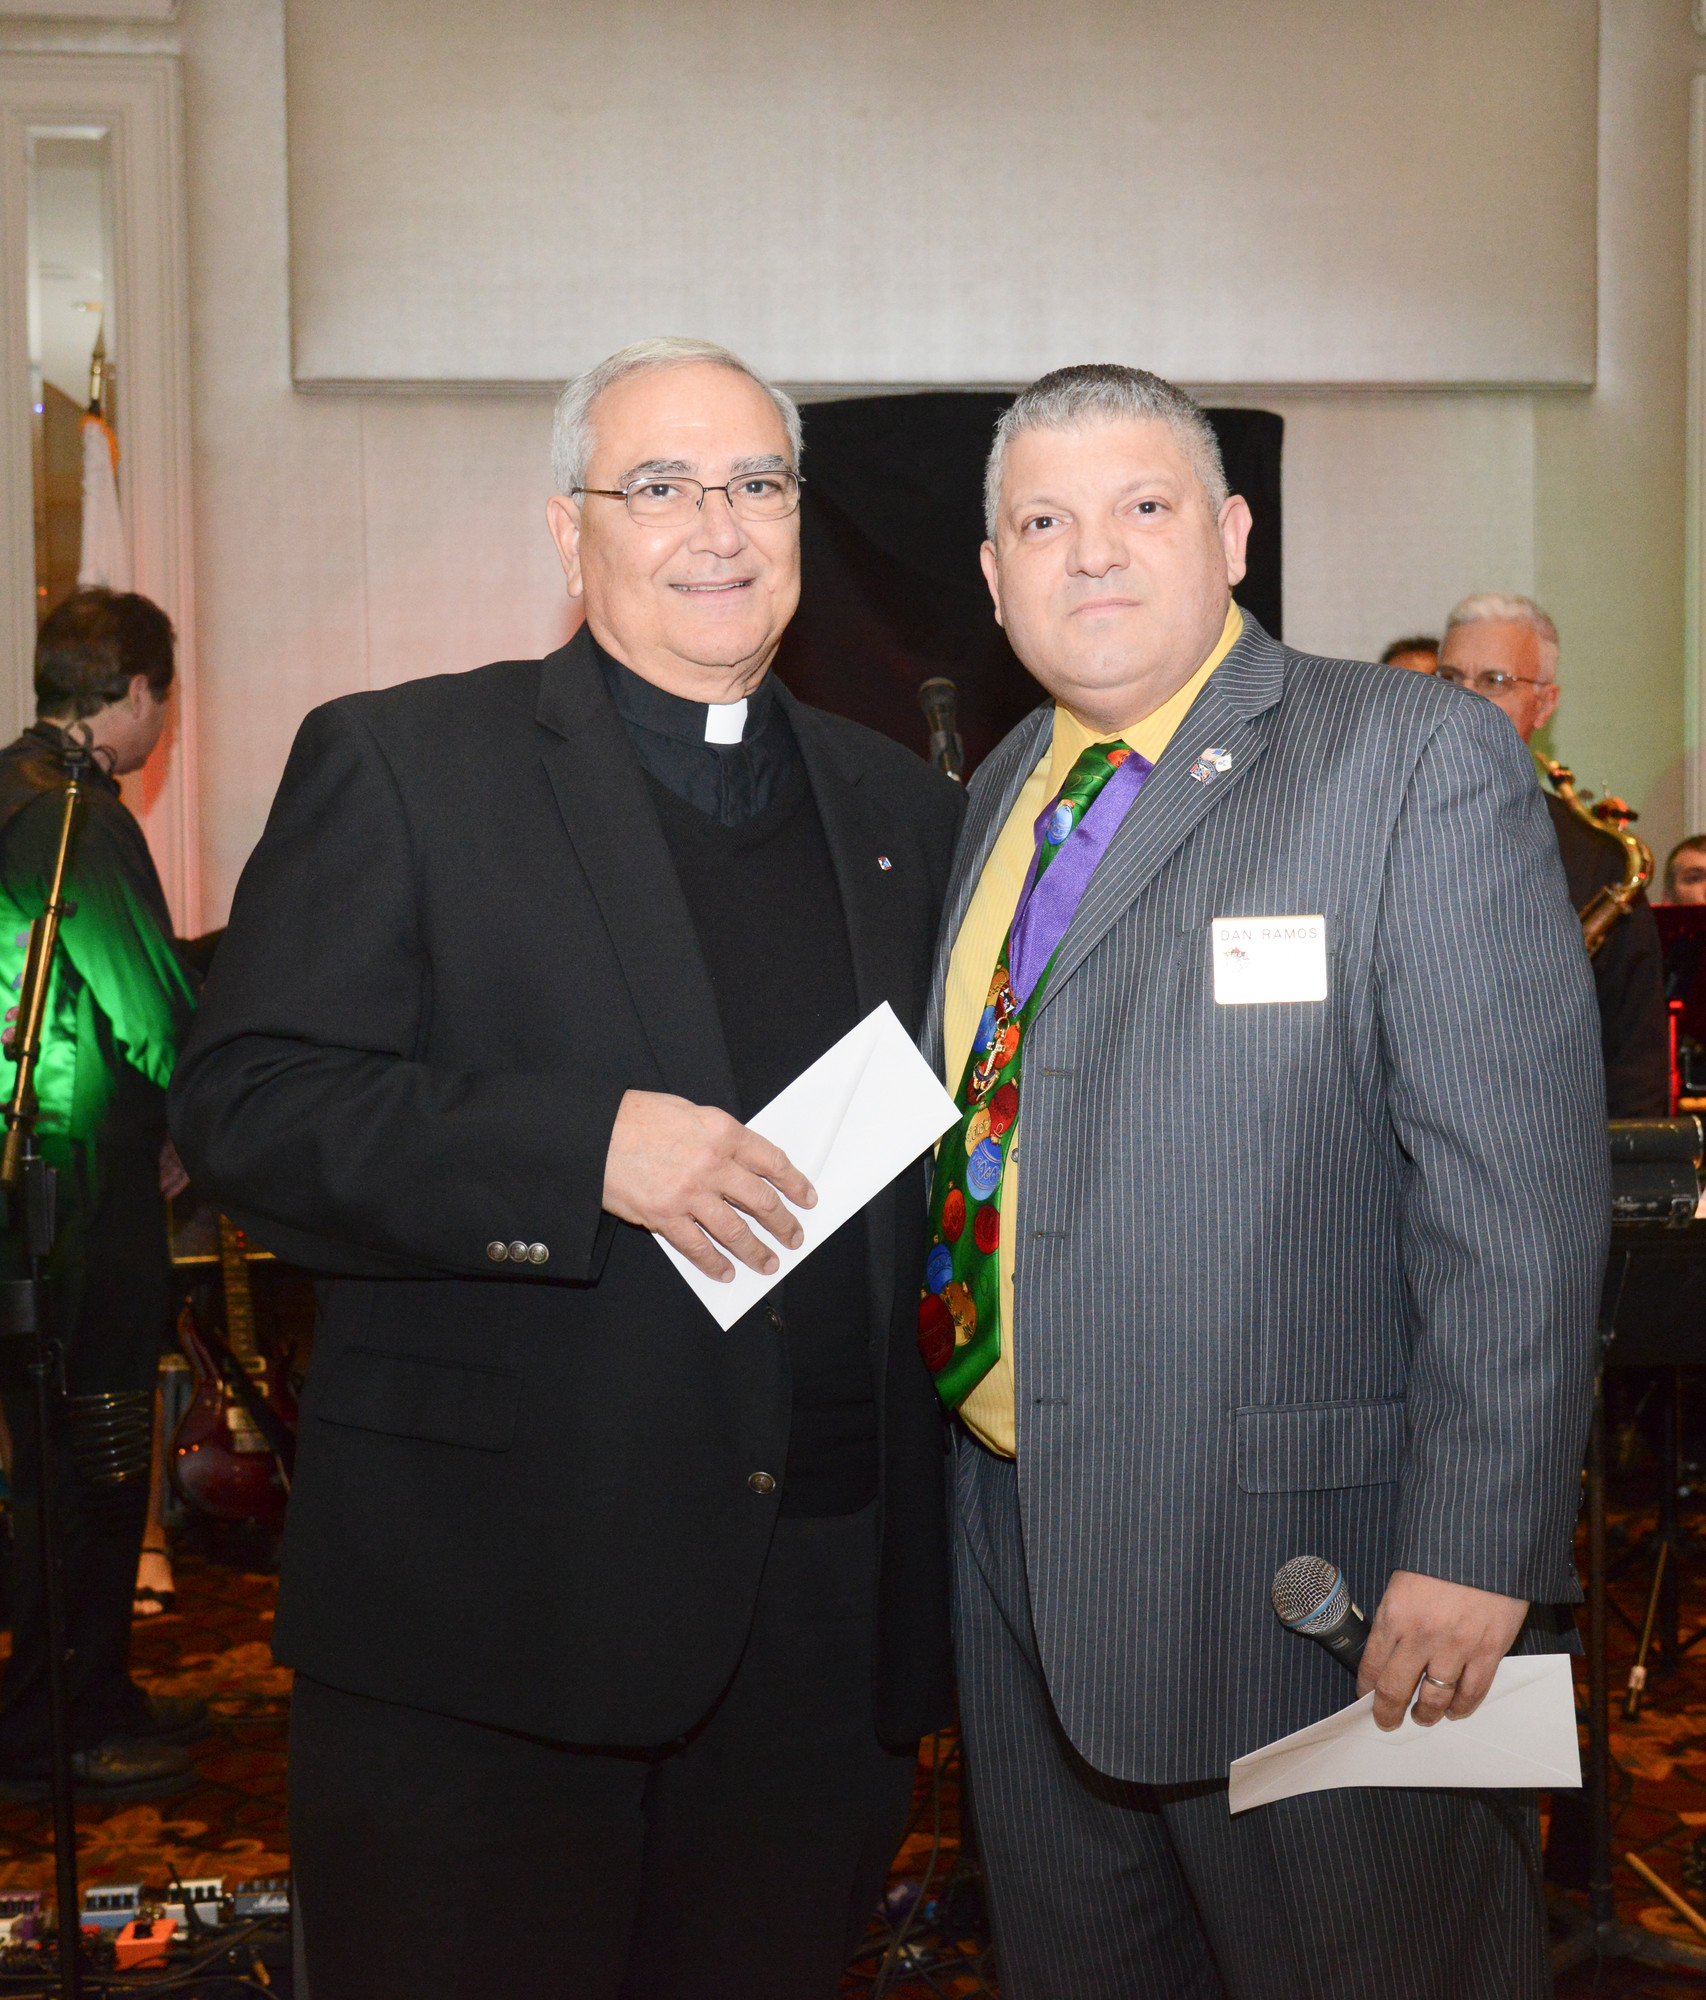 Fr. Lombardi was presented a check for $10,000 to  St Anthonys by Dan Ramos, the Grand Knight.